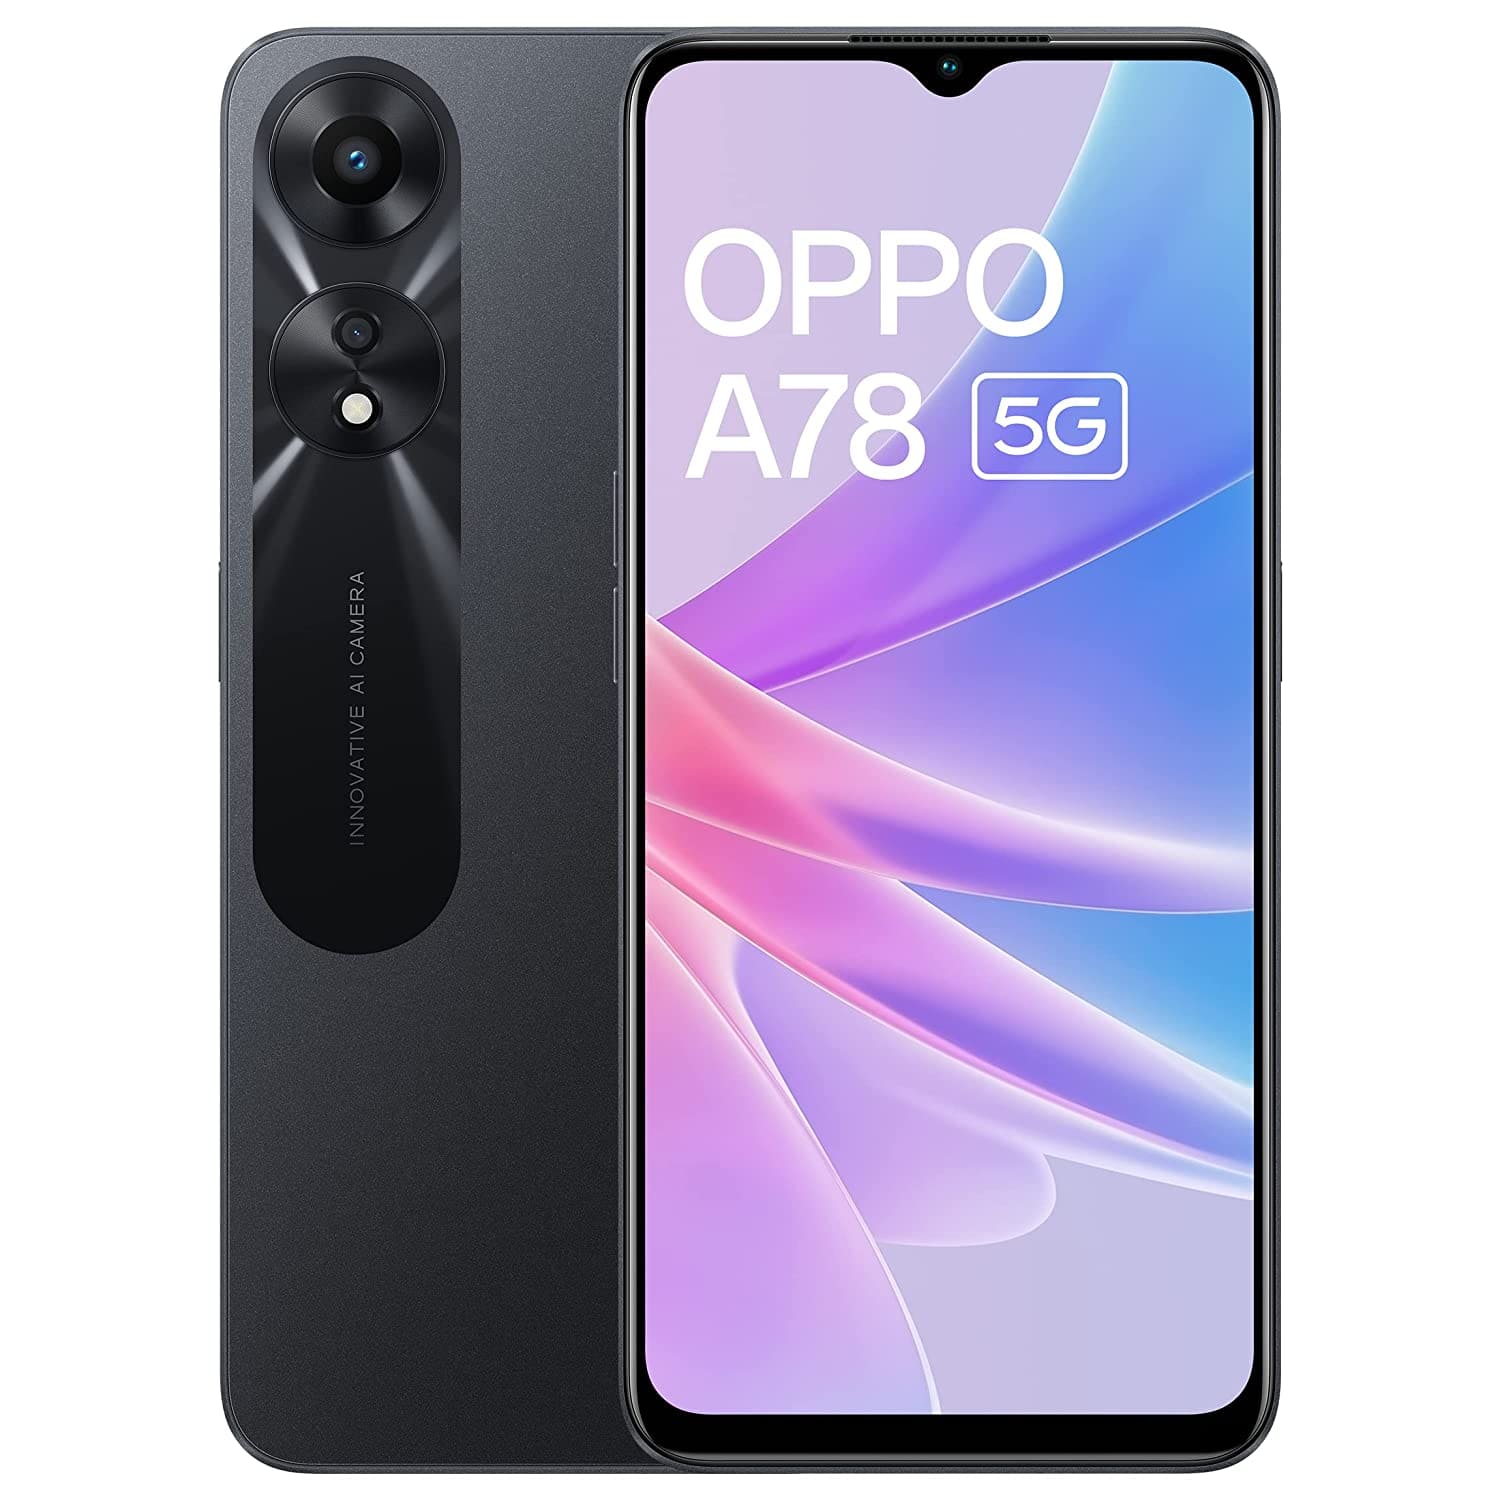 Oppo A78 5G is a best phone under 20000